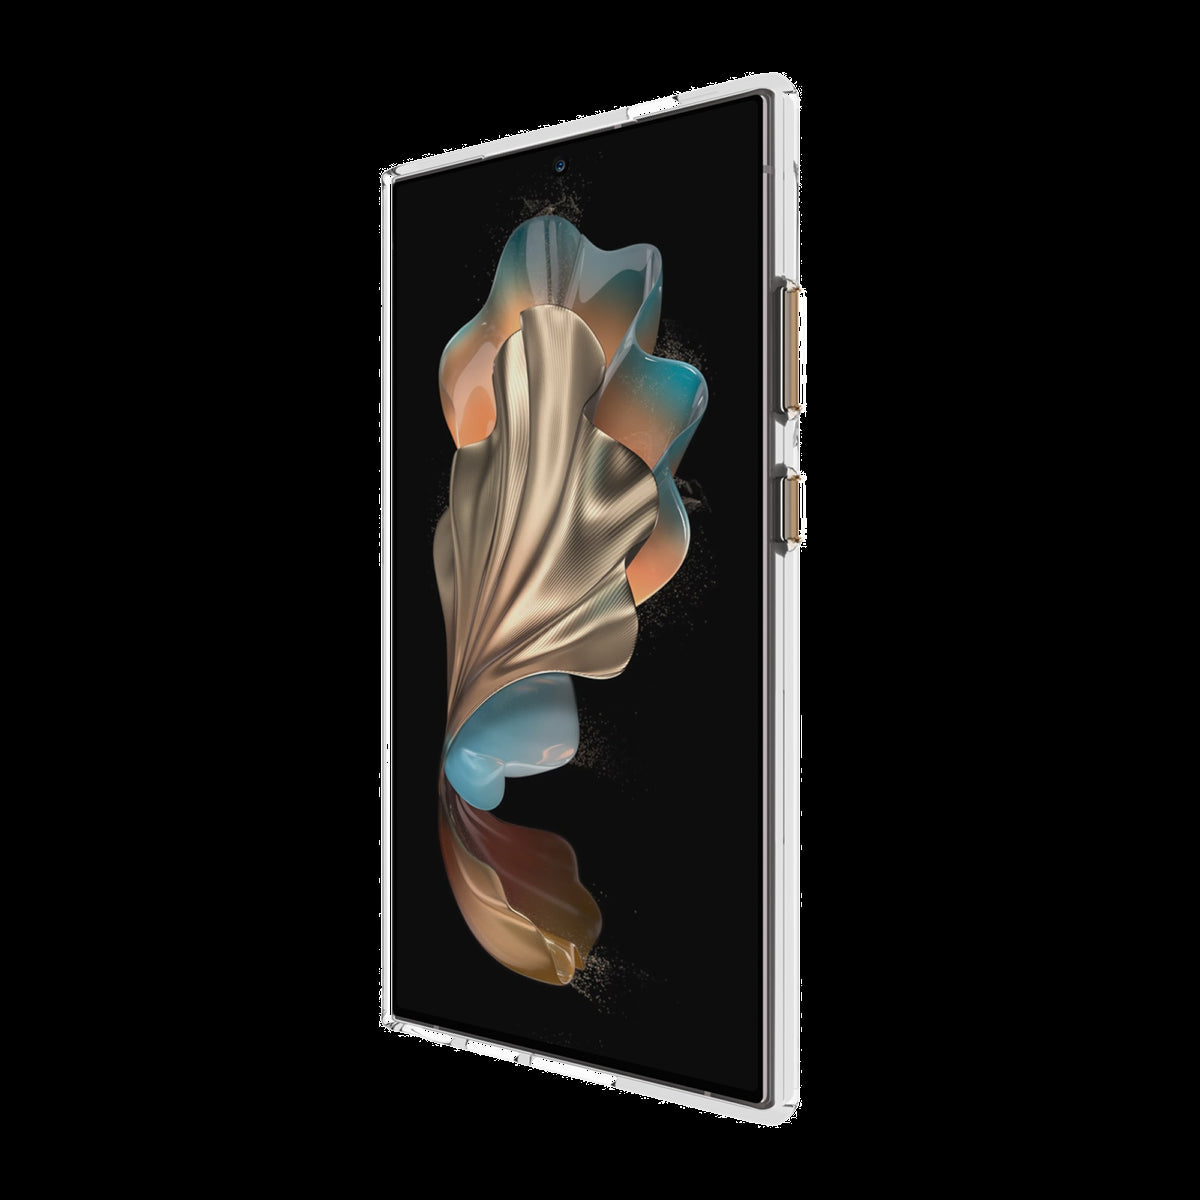 <p>The Case-Mate Floral Gems case features an eye-catching metallic foil floral design paired with recessed gemstones which beautifully compliments your device.</p>